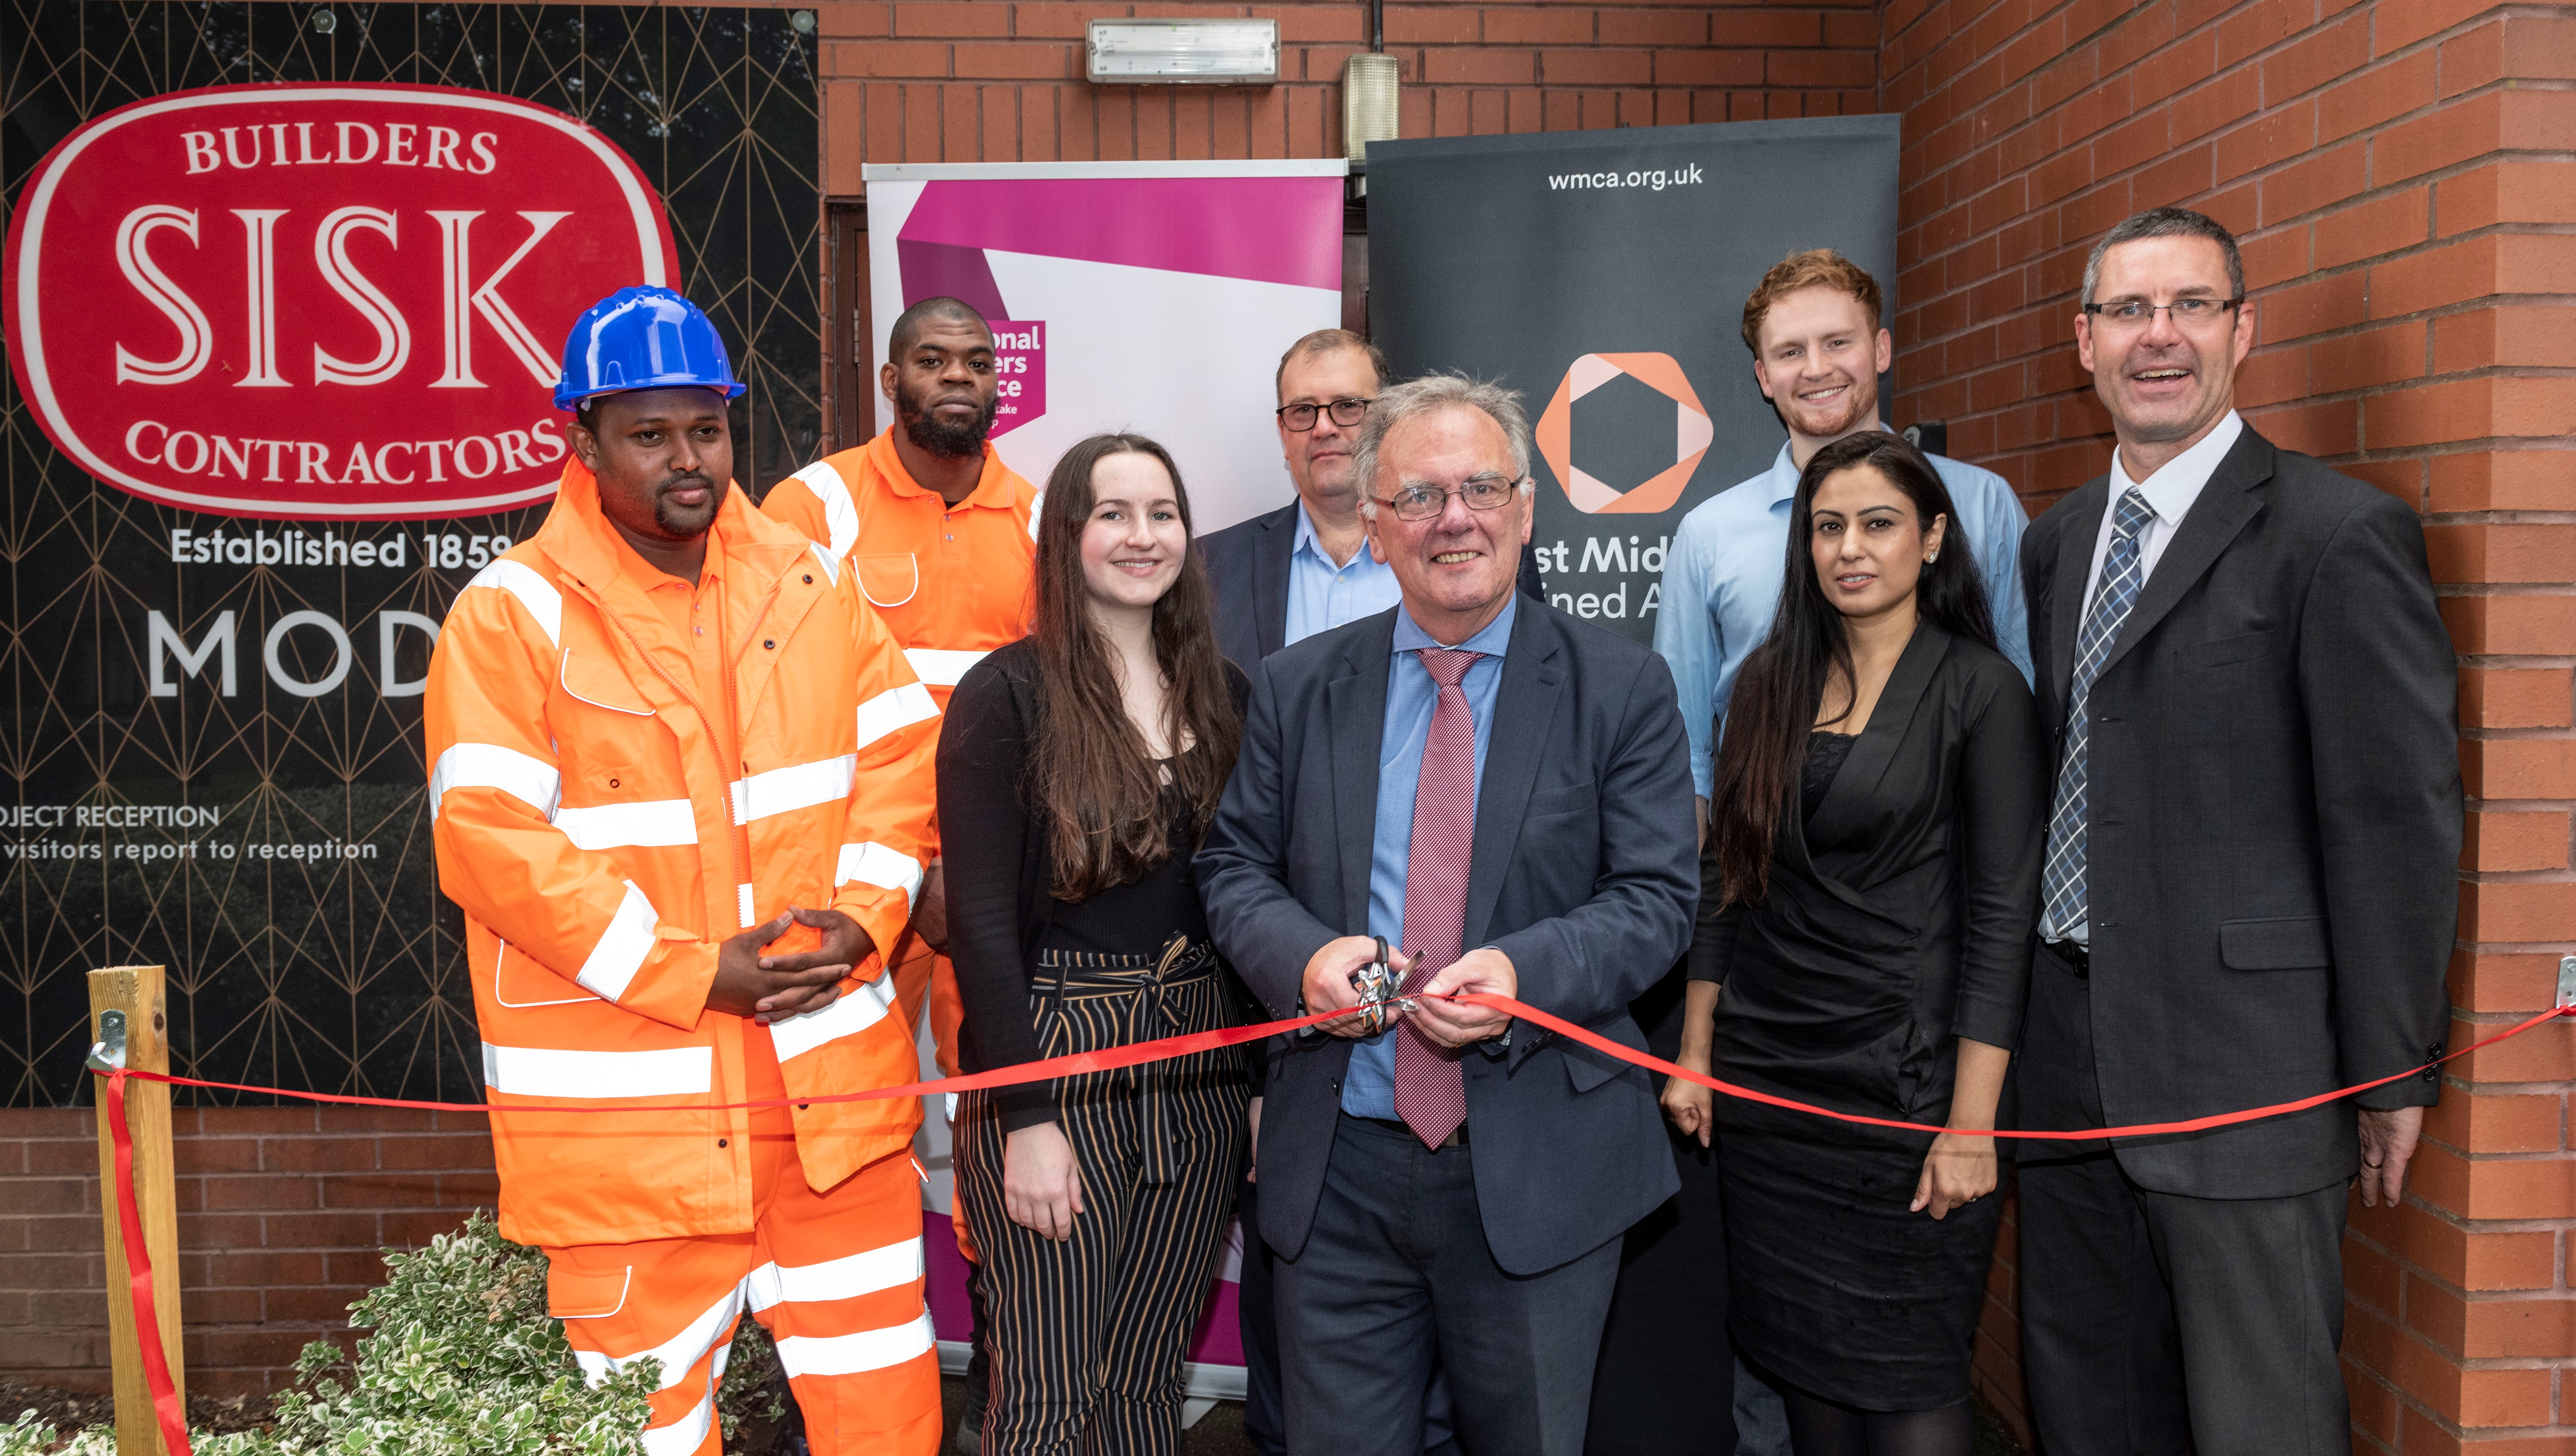 Pictured opening the new construction hub are (L-R) placement trainees Mahad Ali and Nathaniel Robinson, Sisk undergraduate engineer Bethany Brooks, company managing director North & Major Projects Guy Fowler, Cllr Sir Albert Bore (Ladywood), Sisk assistant quantity surveyor Alex Mills, company skills and employment lead Bandhana Karwal and WMCA construction skills project manager Shaun Hall